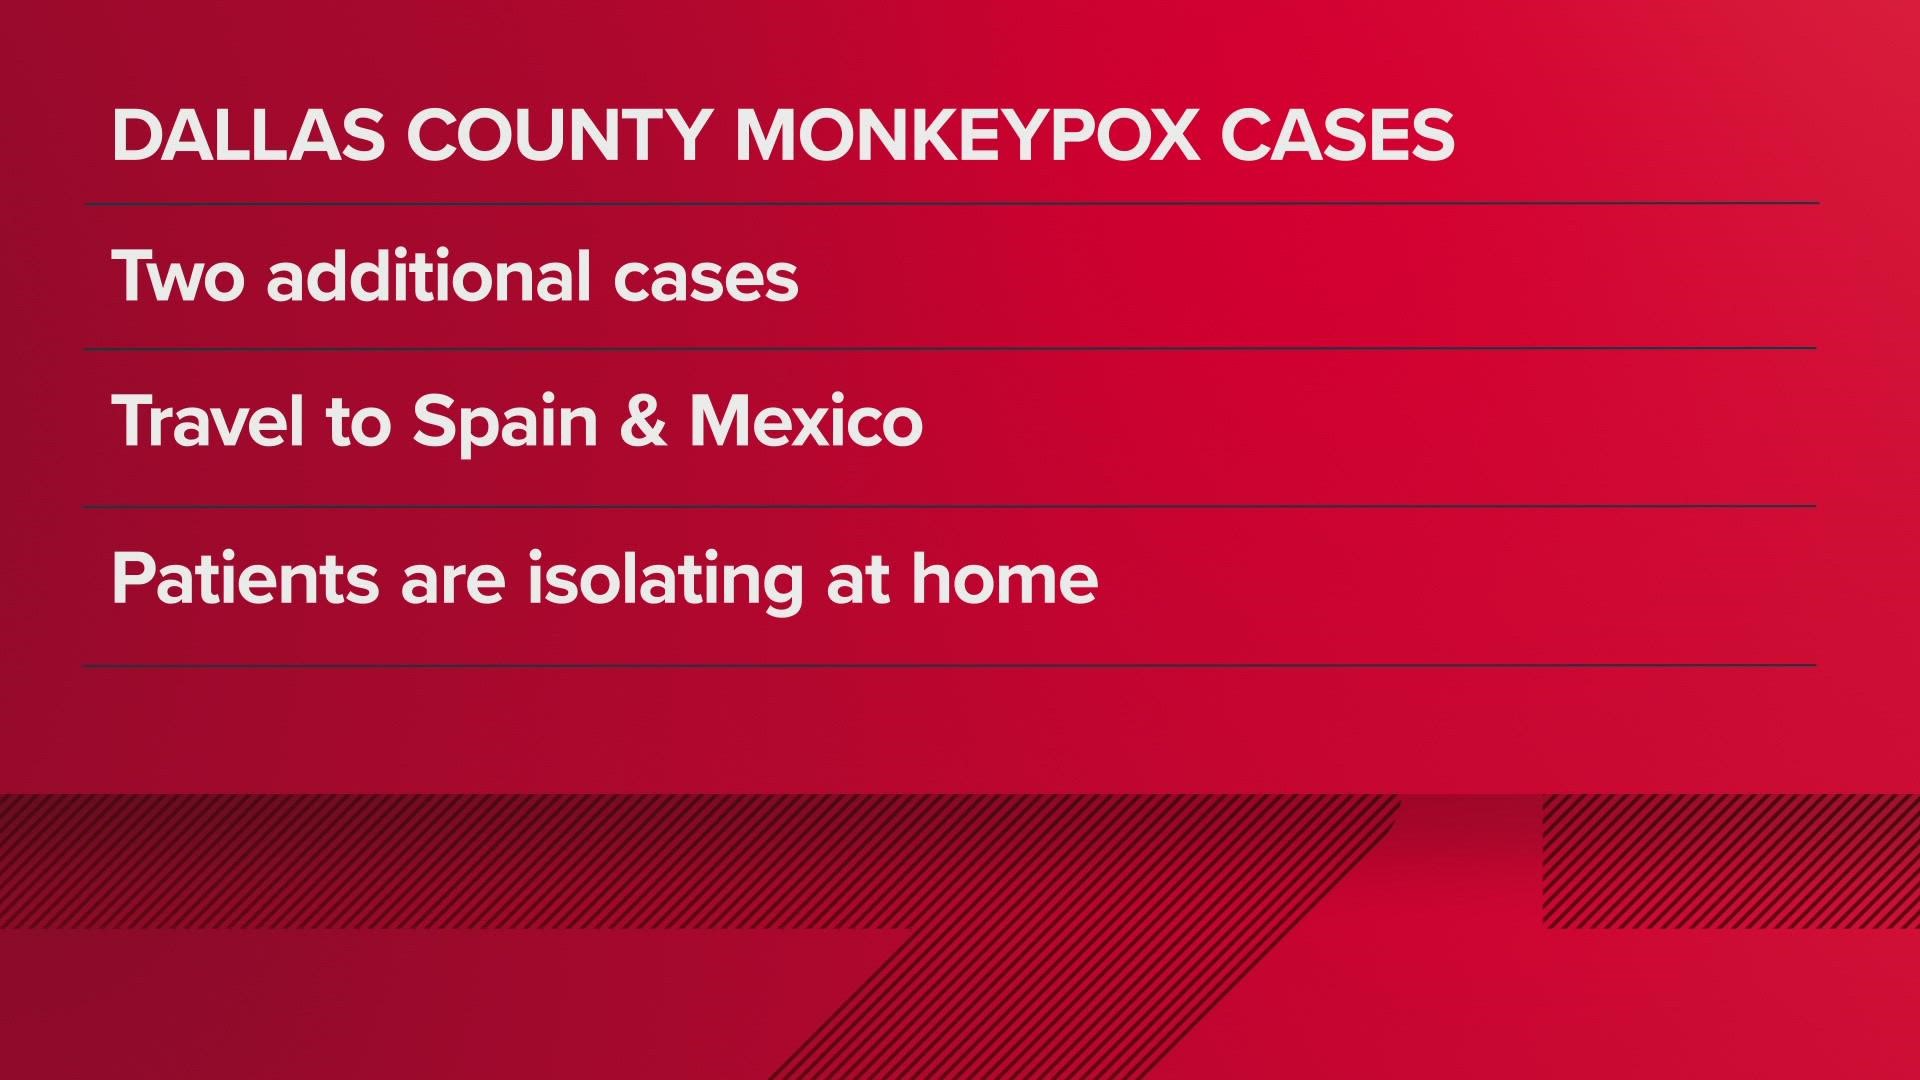 Monkeypox is relatively rare and not easily transmitted.